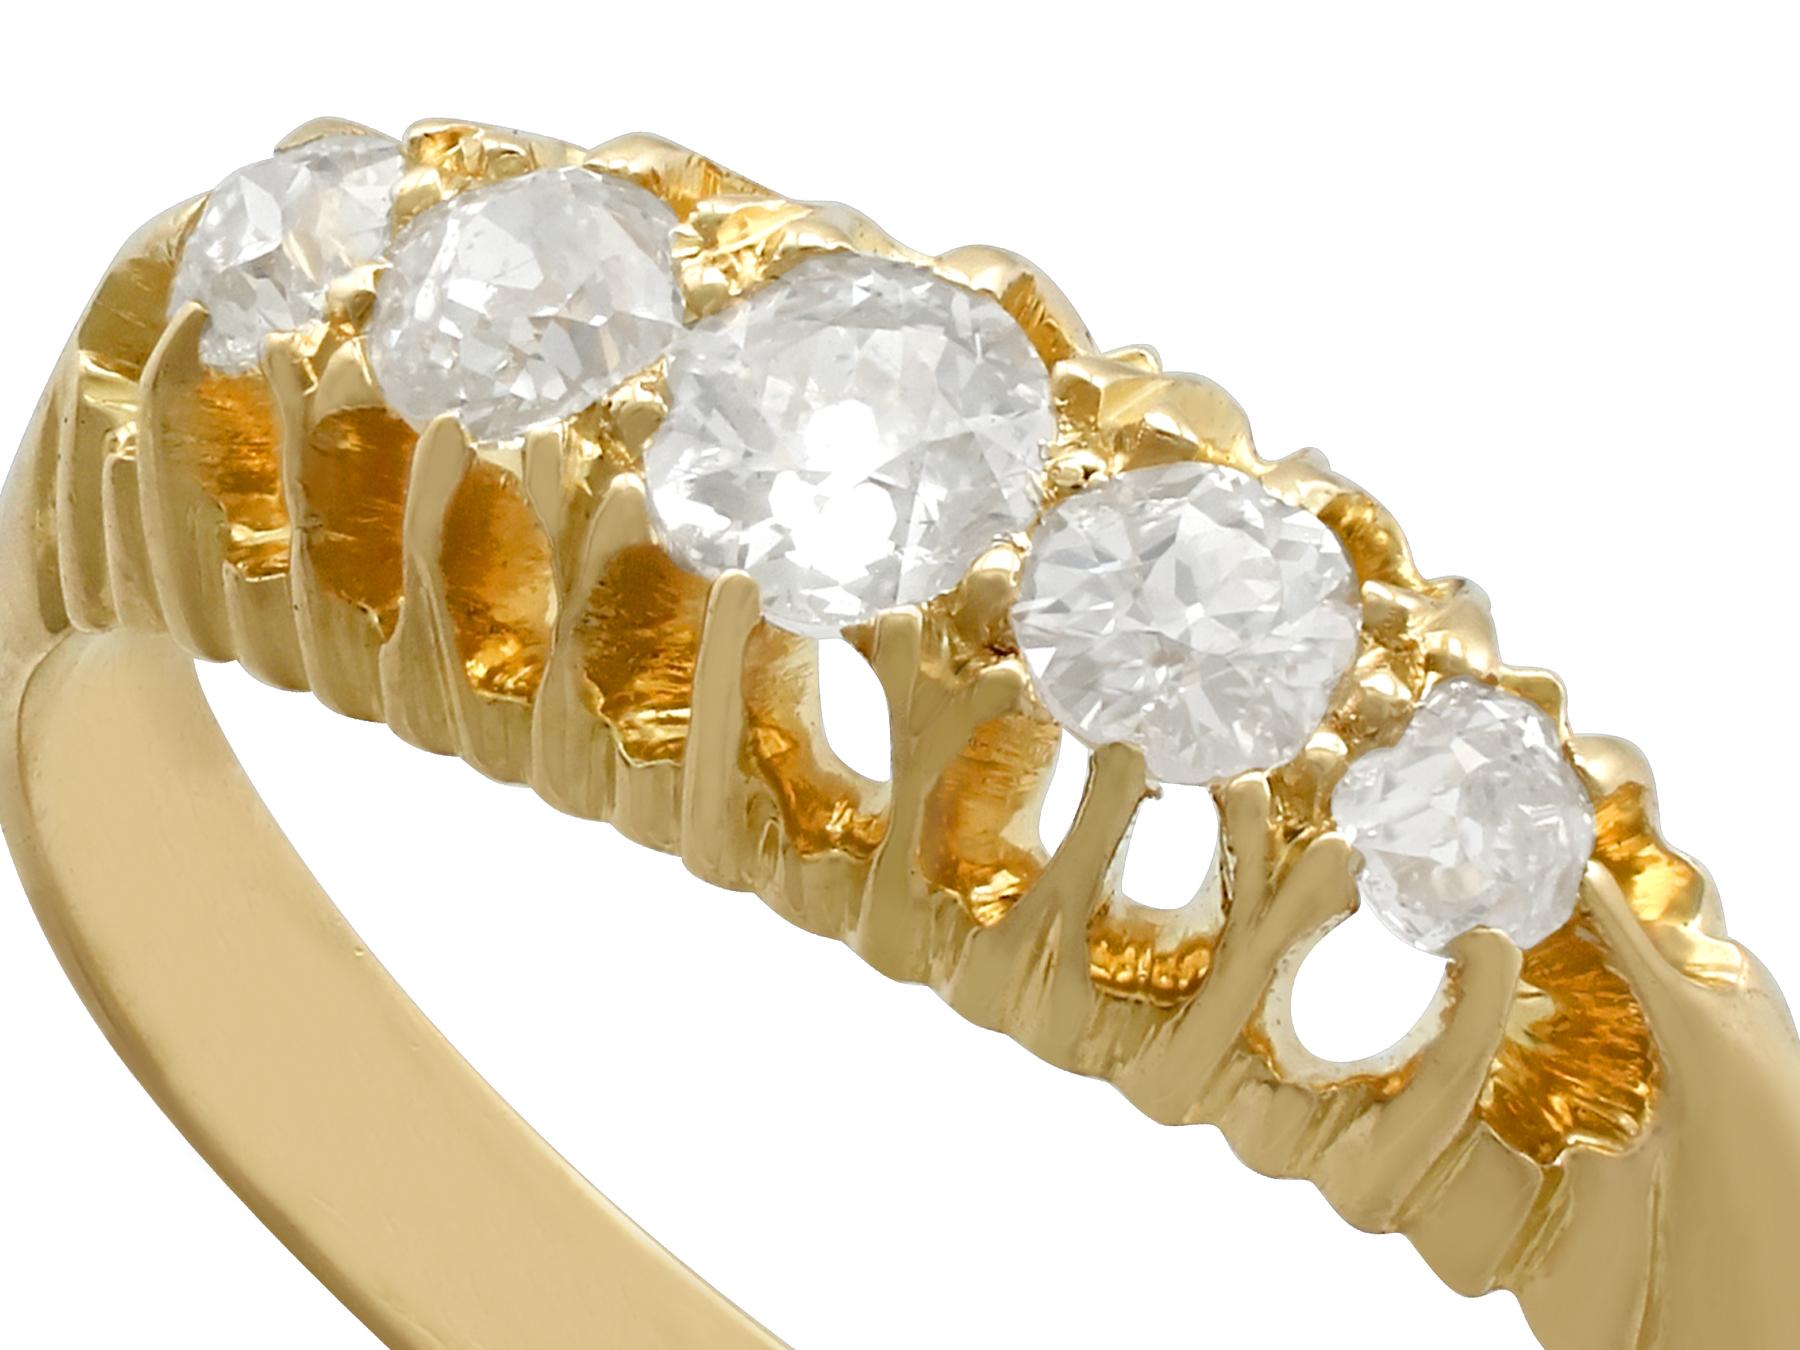 A fine and impressive antique 0.56 carat diamond and 18 karat yellow gold five stone cocktail ring; part of our diverse antique jewelry and estate jewelry collections.

This fine and impressive antique Edwardian diamond ring has been crafted in 18k